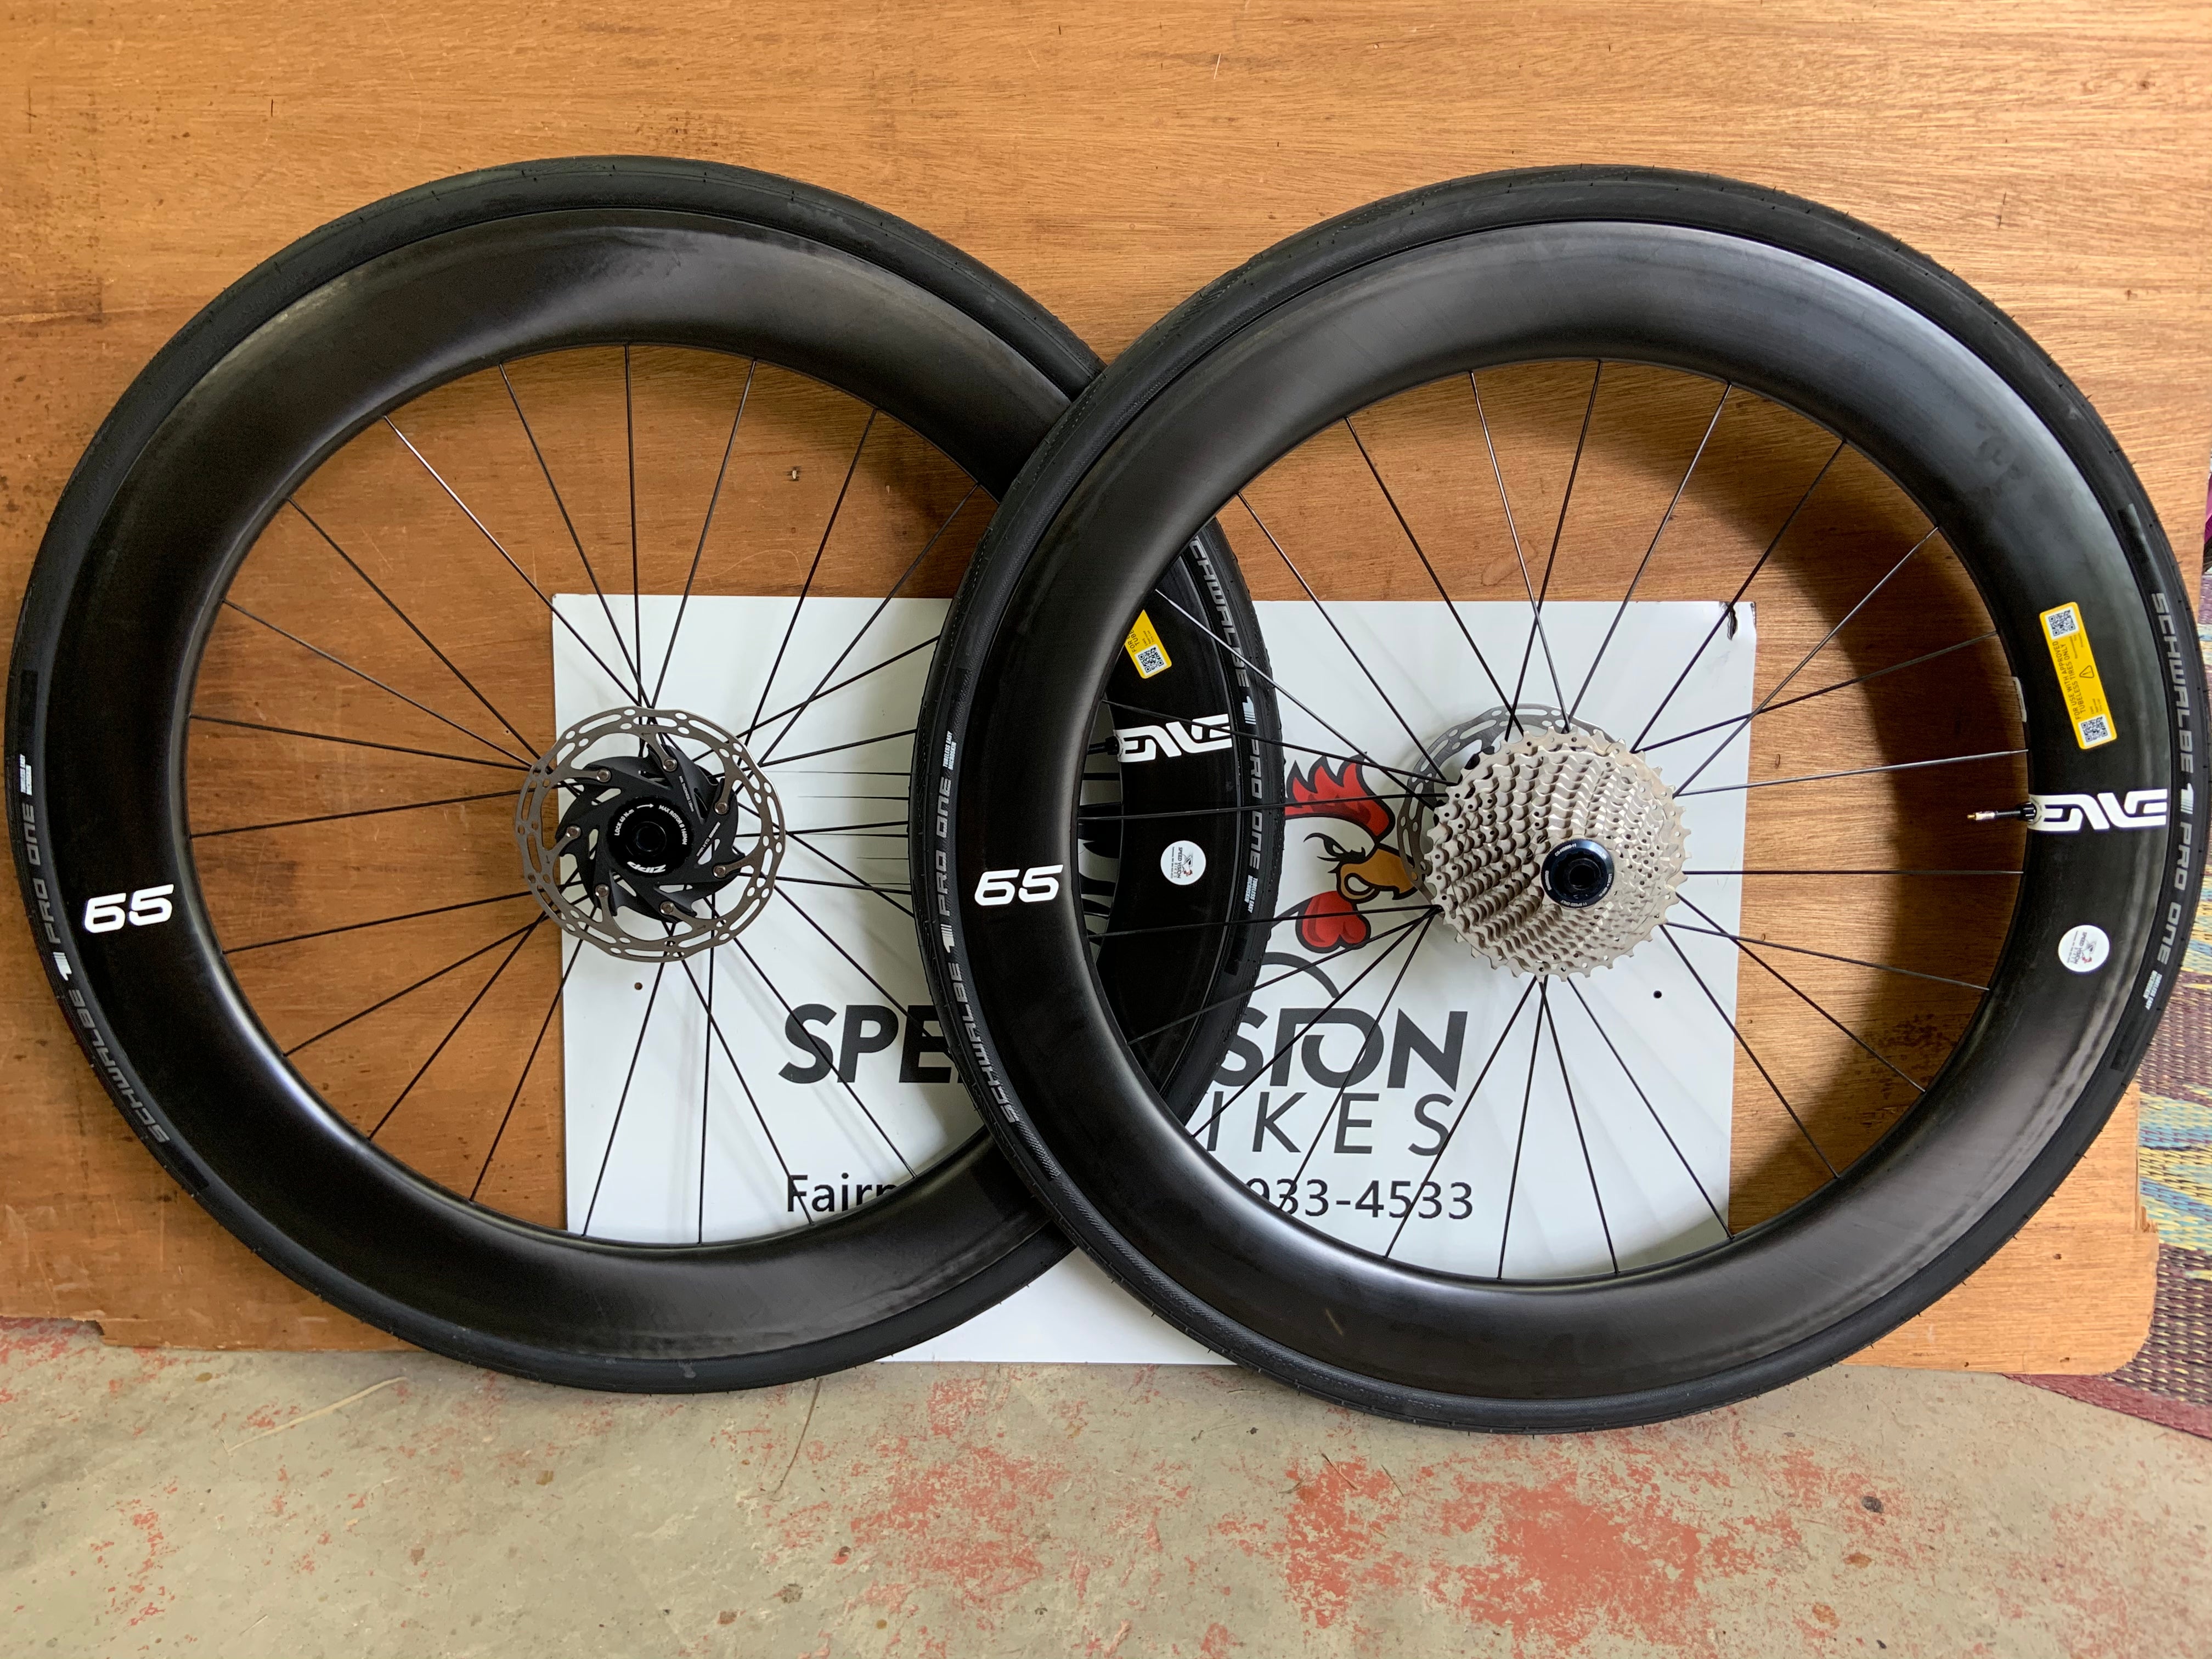 CLOSEOUT ENVE Foundation 45 and 65 Disc brake Wheelsets